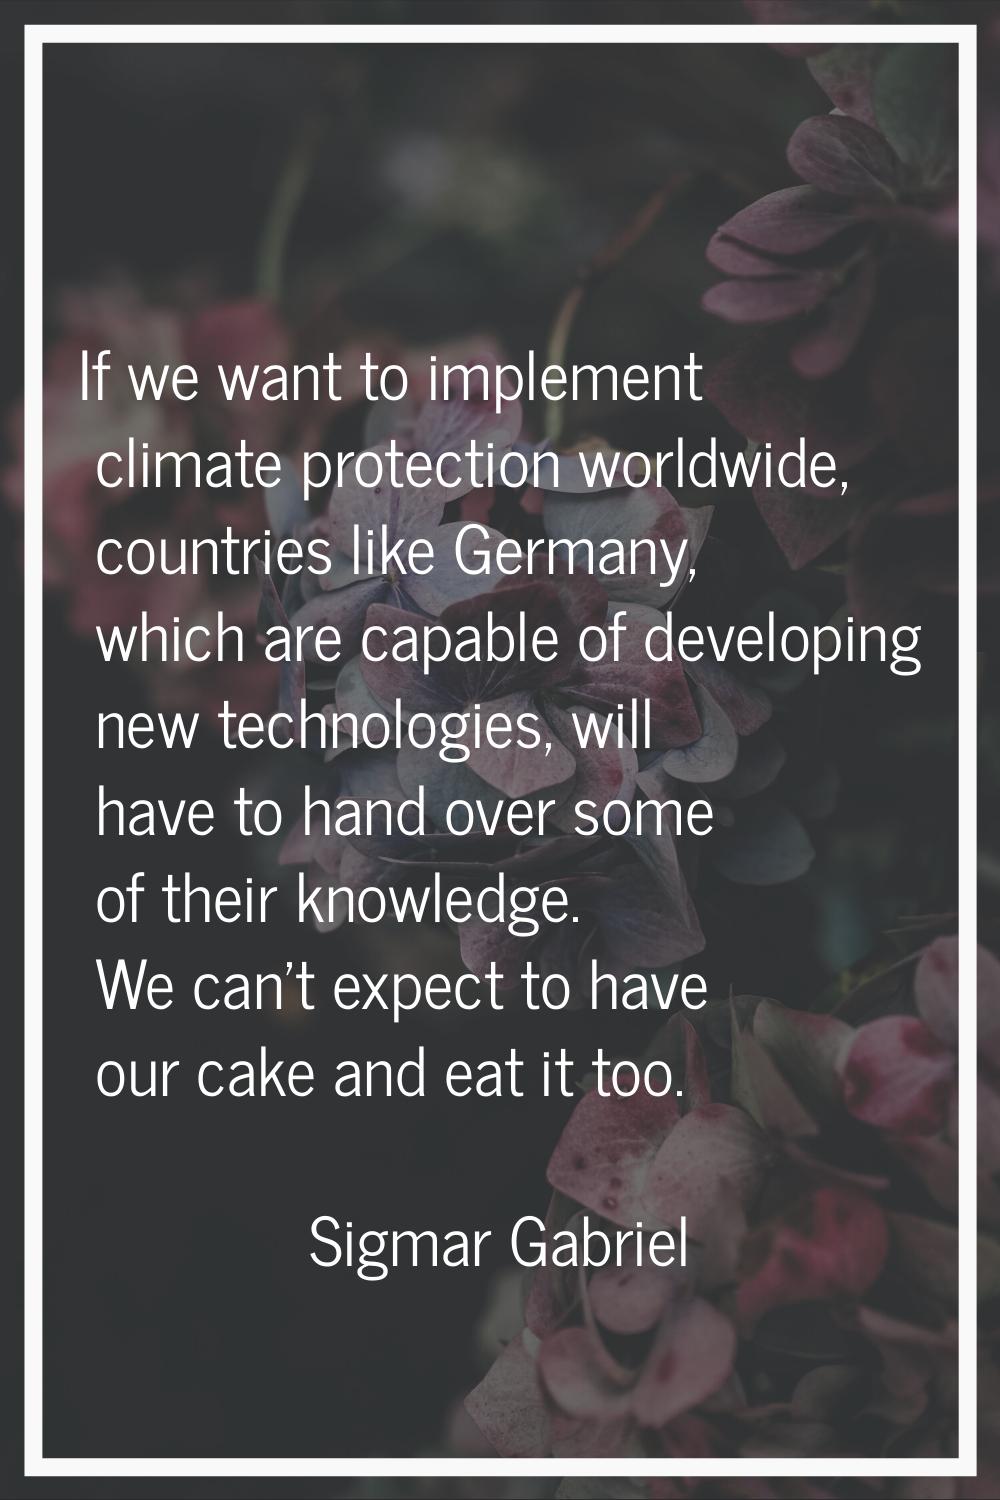 If we want to implement climate protection worldwide, countries like Germany, which are capable of 